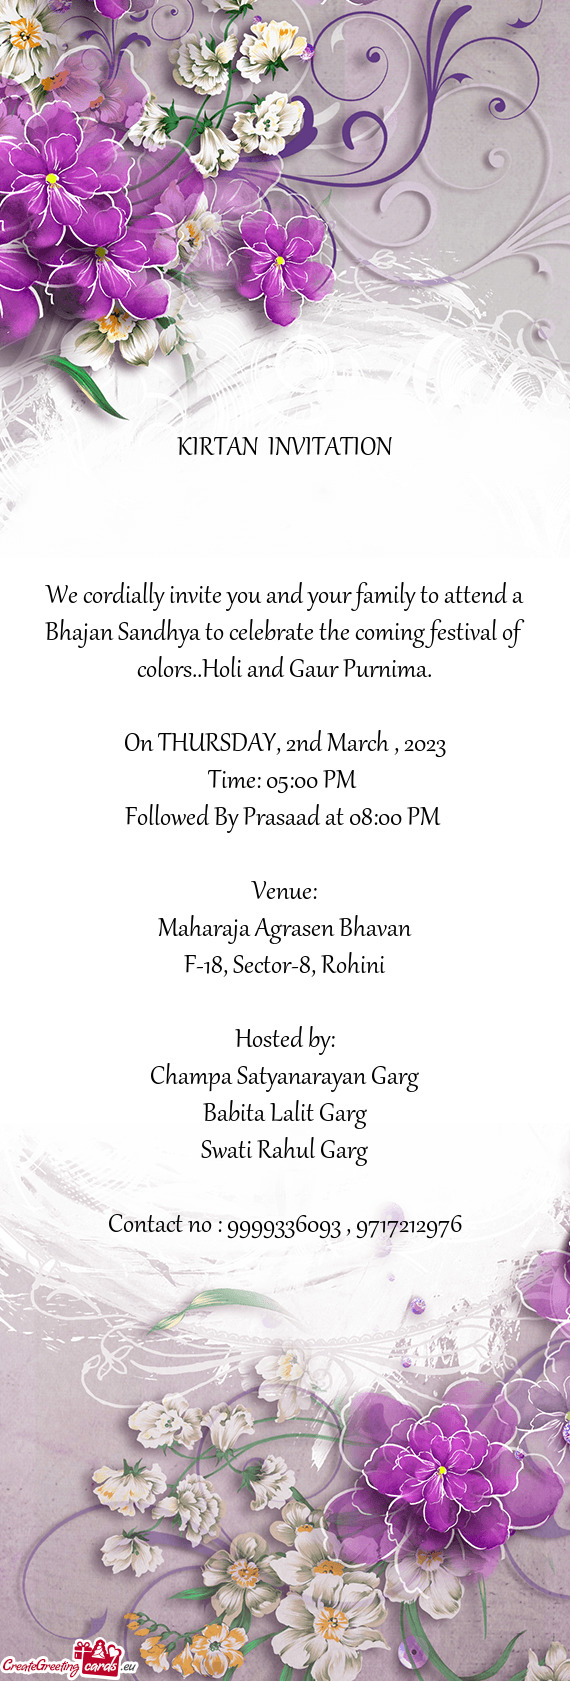 We cordially invite you and your family to attend a Bhajan Sandhya to celebrate the coming festival